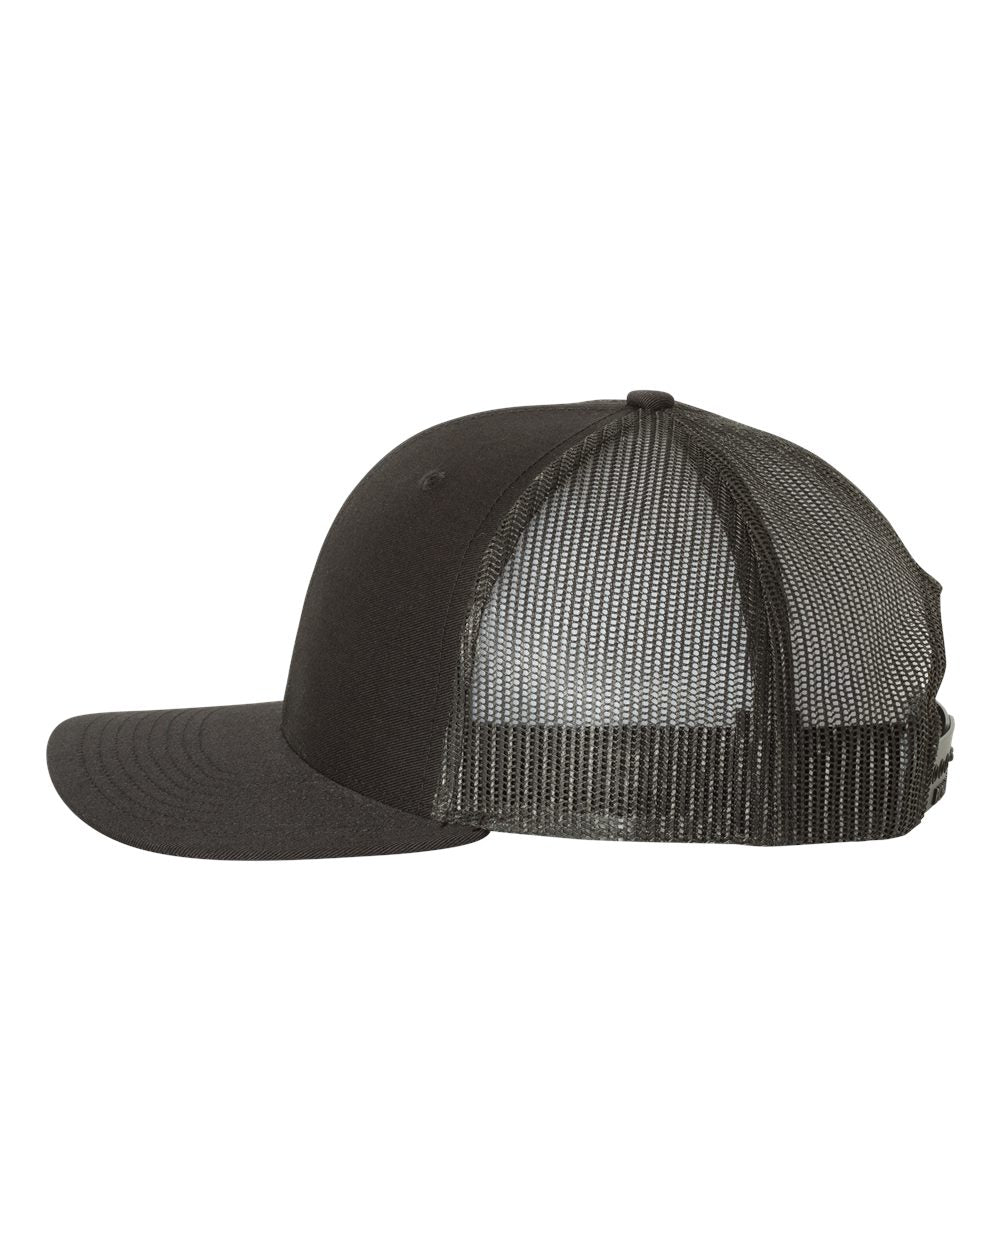 Promote Your Business with Custom Richardson Trucker Hats and